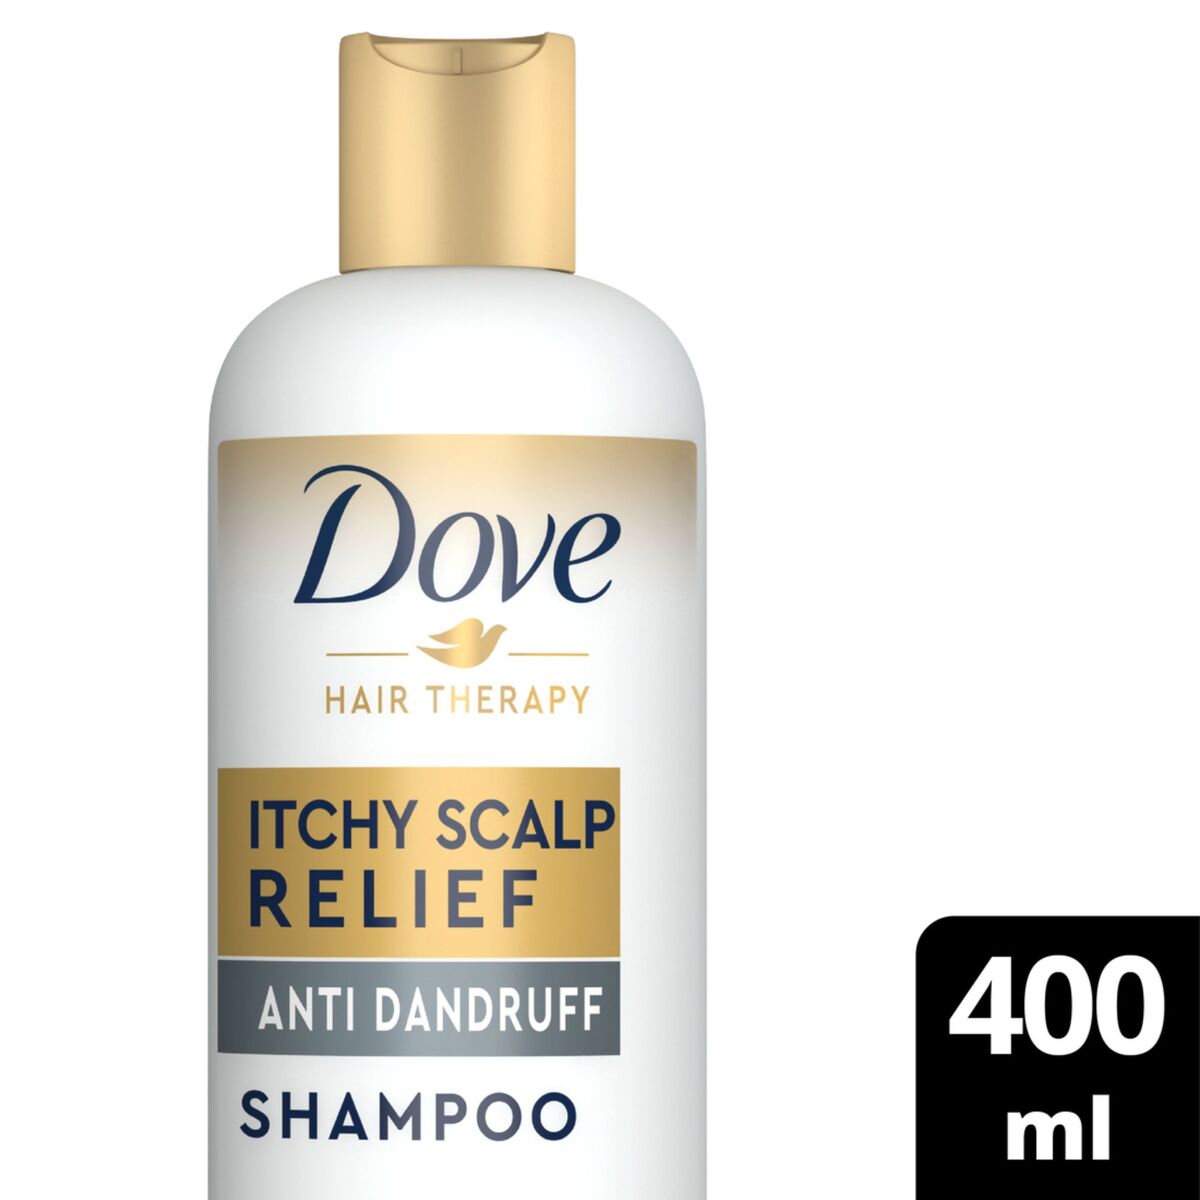 Dove Hair Therapy Itchy Scalp Relief Anti Dandruff Shampoo 400 ml